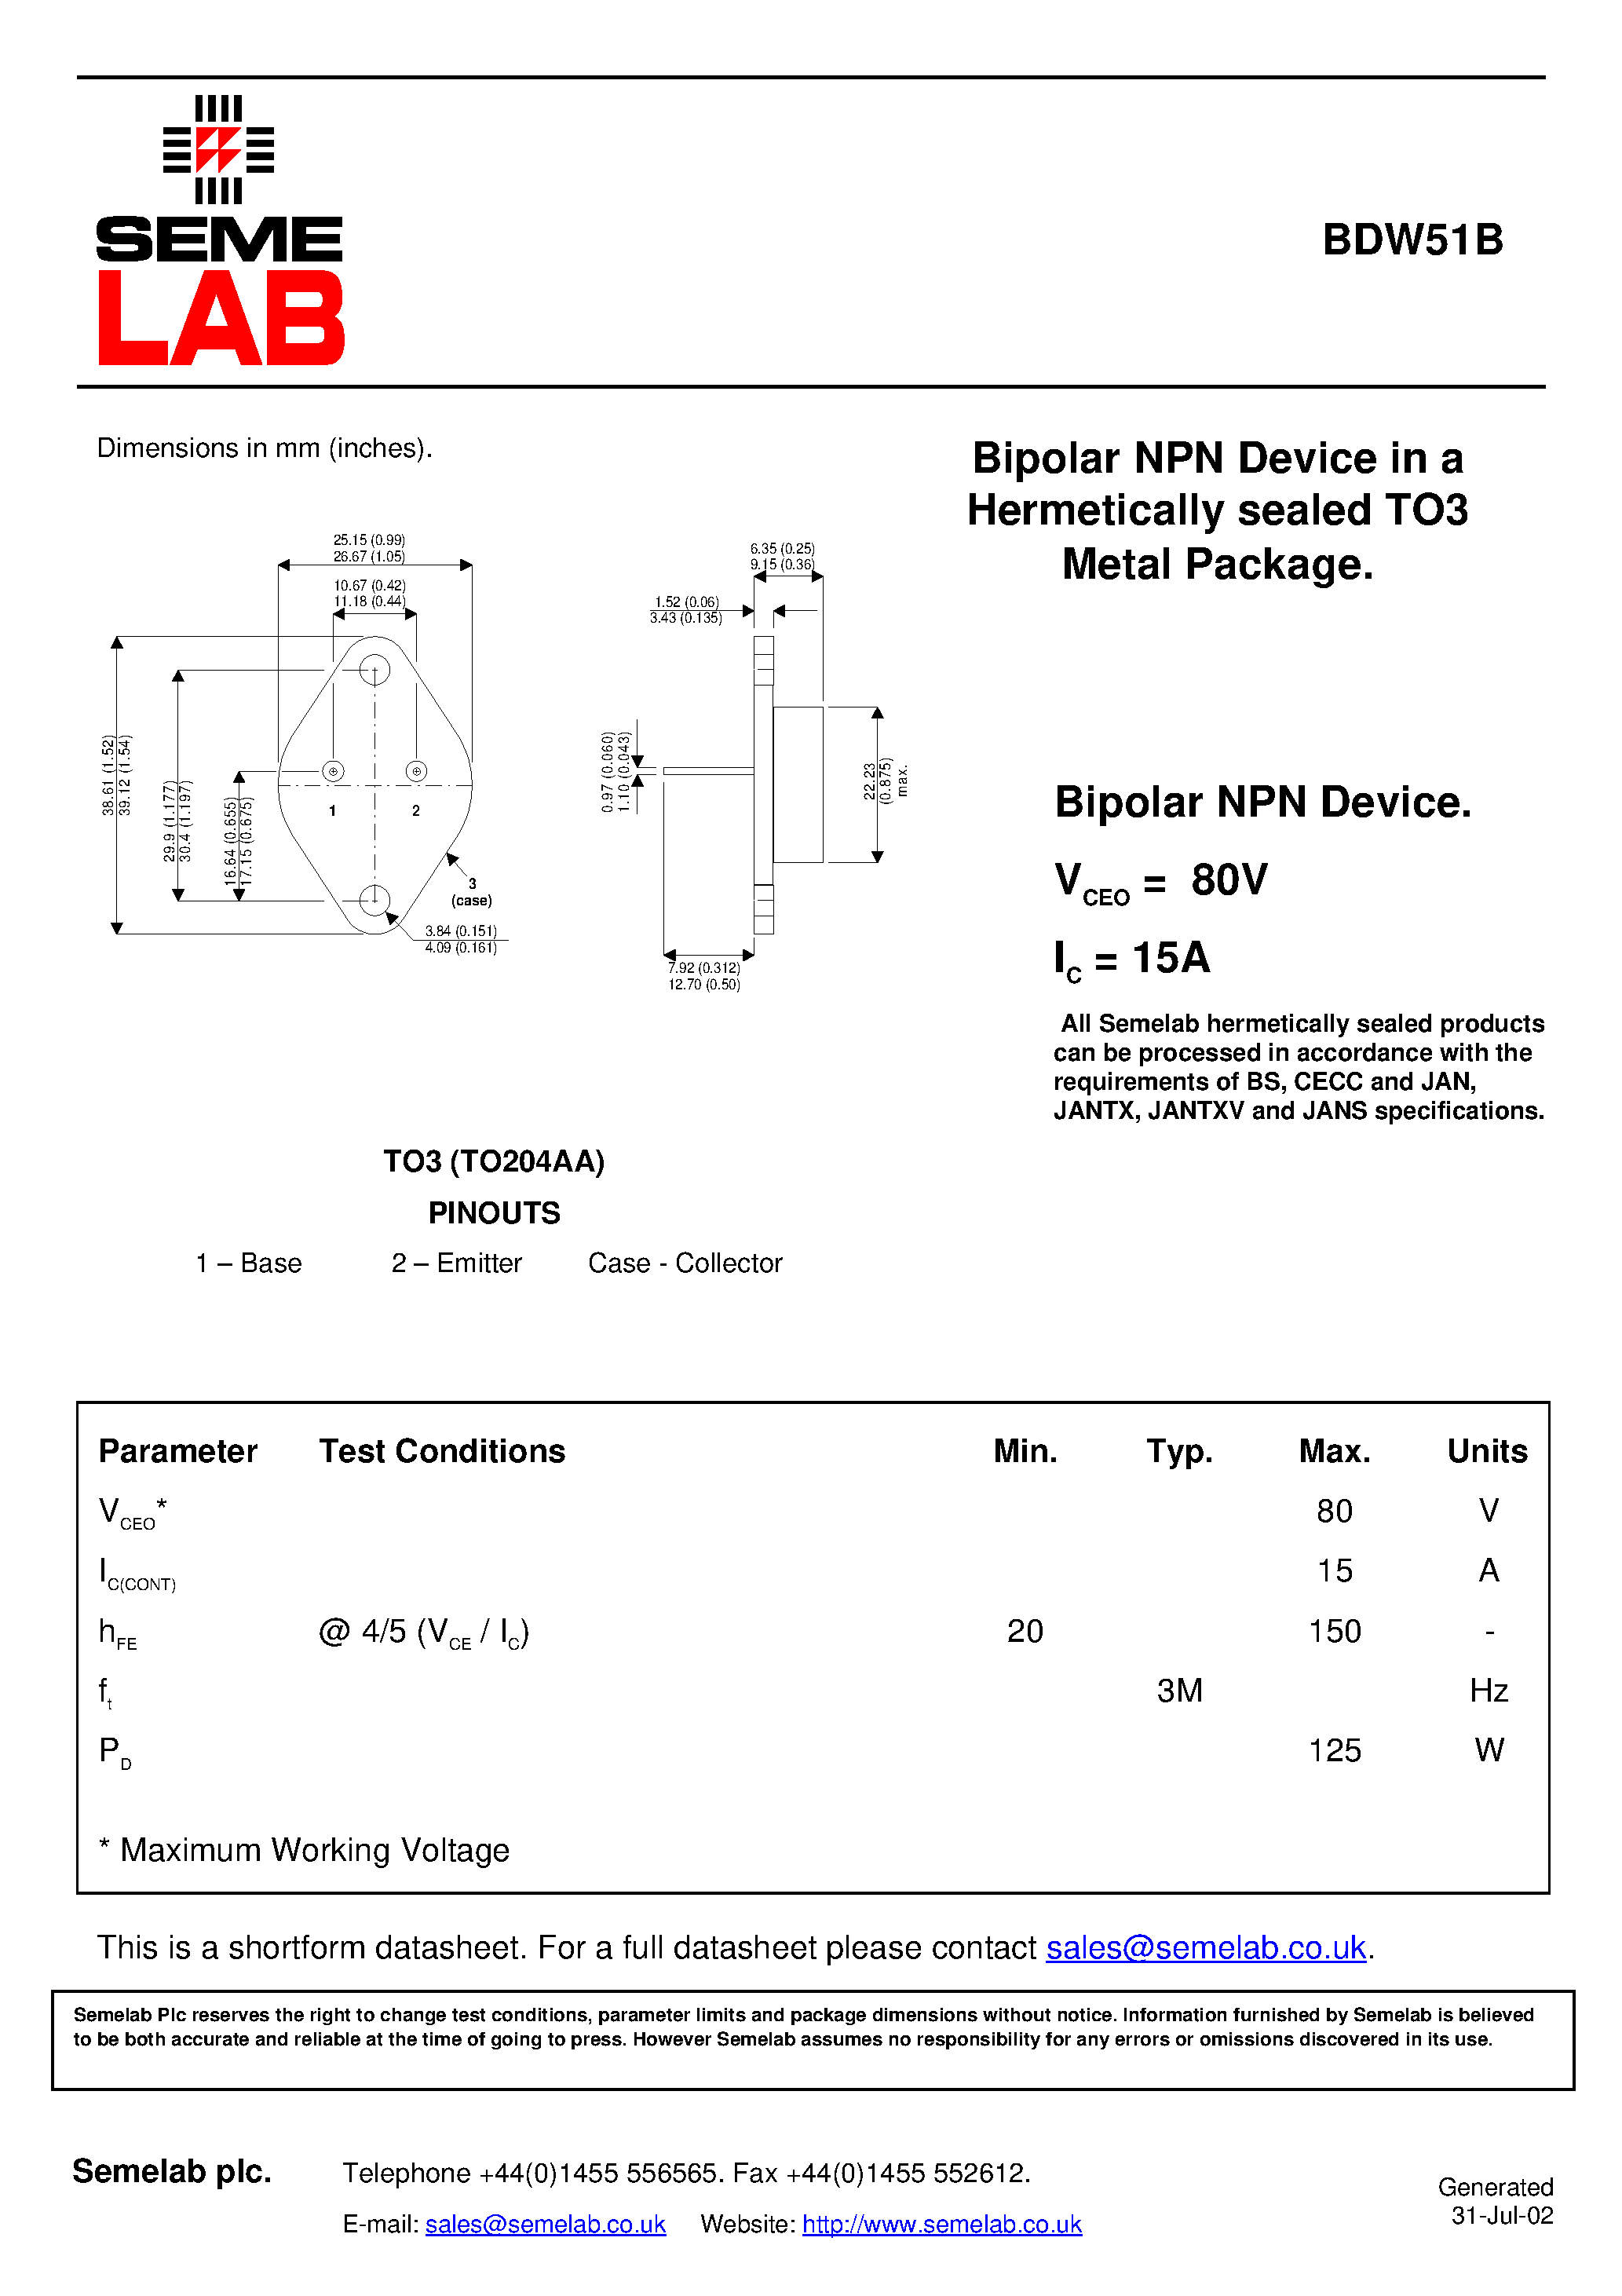 Datasheet BDW51B - Bipolar NPN Device in a Hermetically sealed TO3 Metal Package page 1